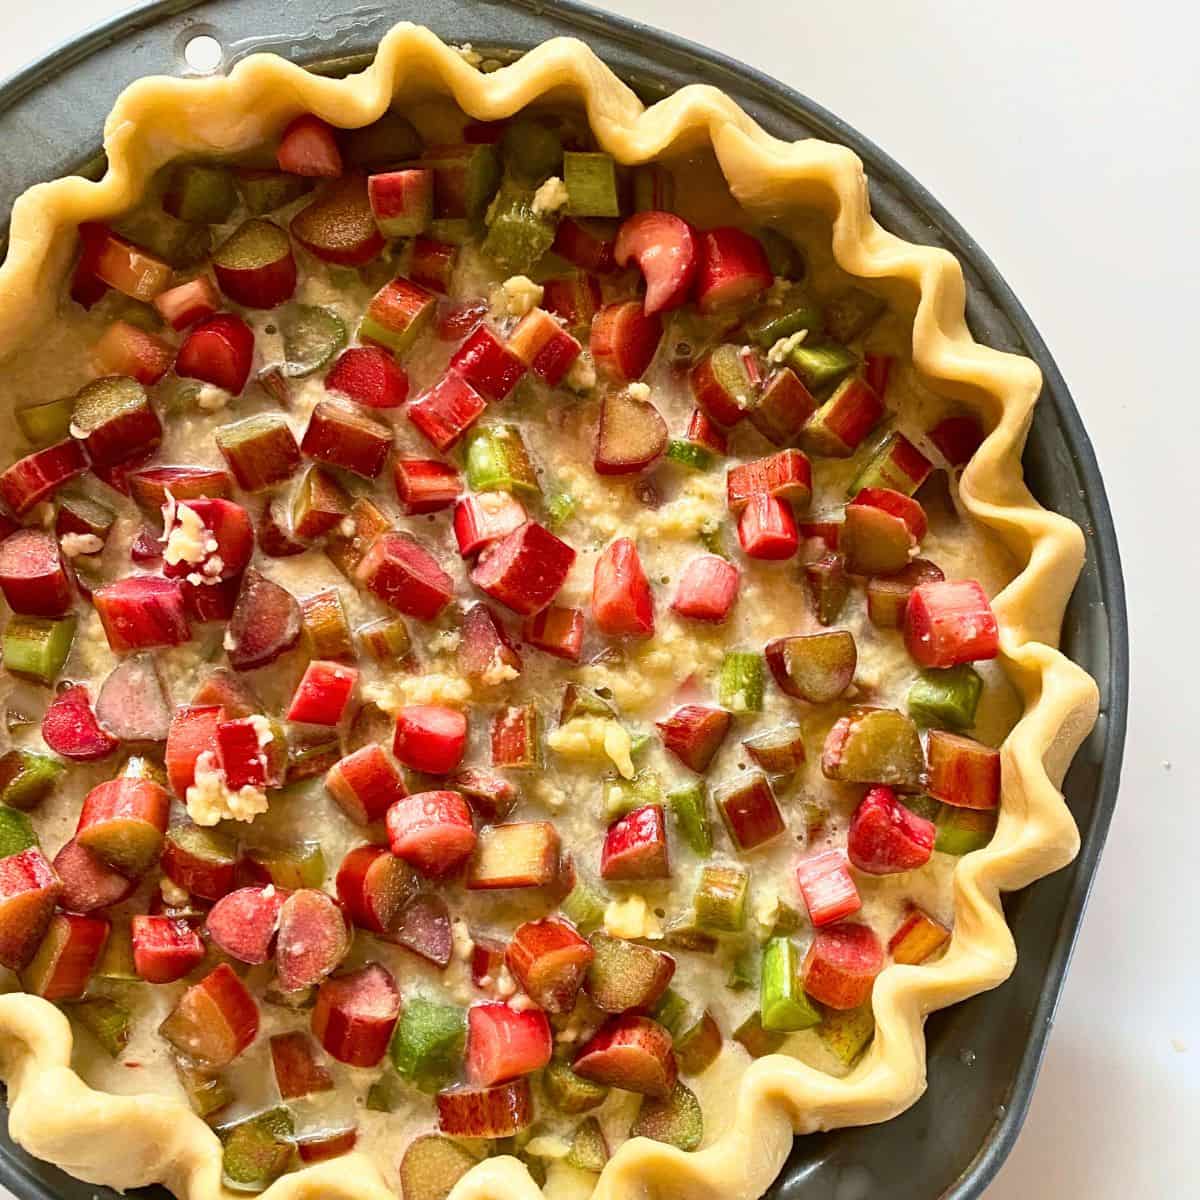 A pie with rhubarb and red and green toppings on a grey tin